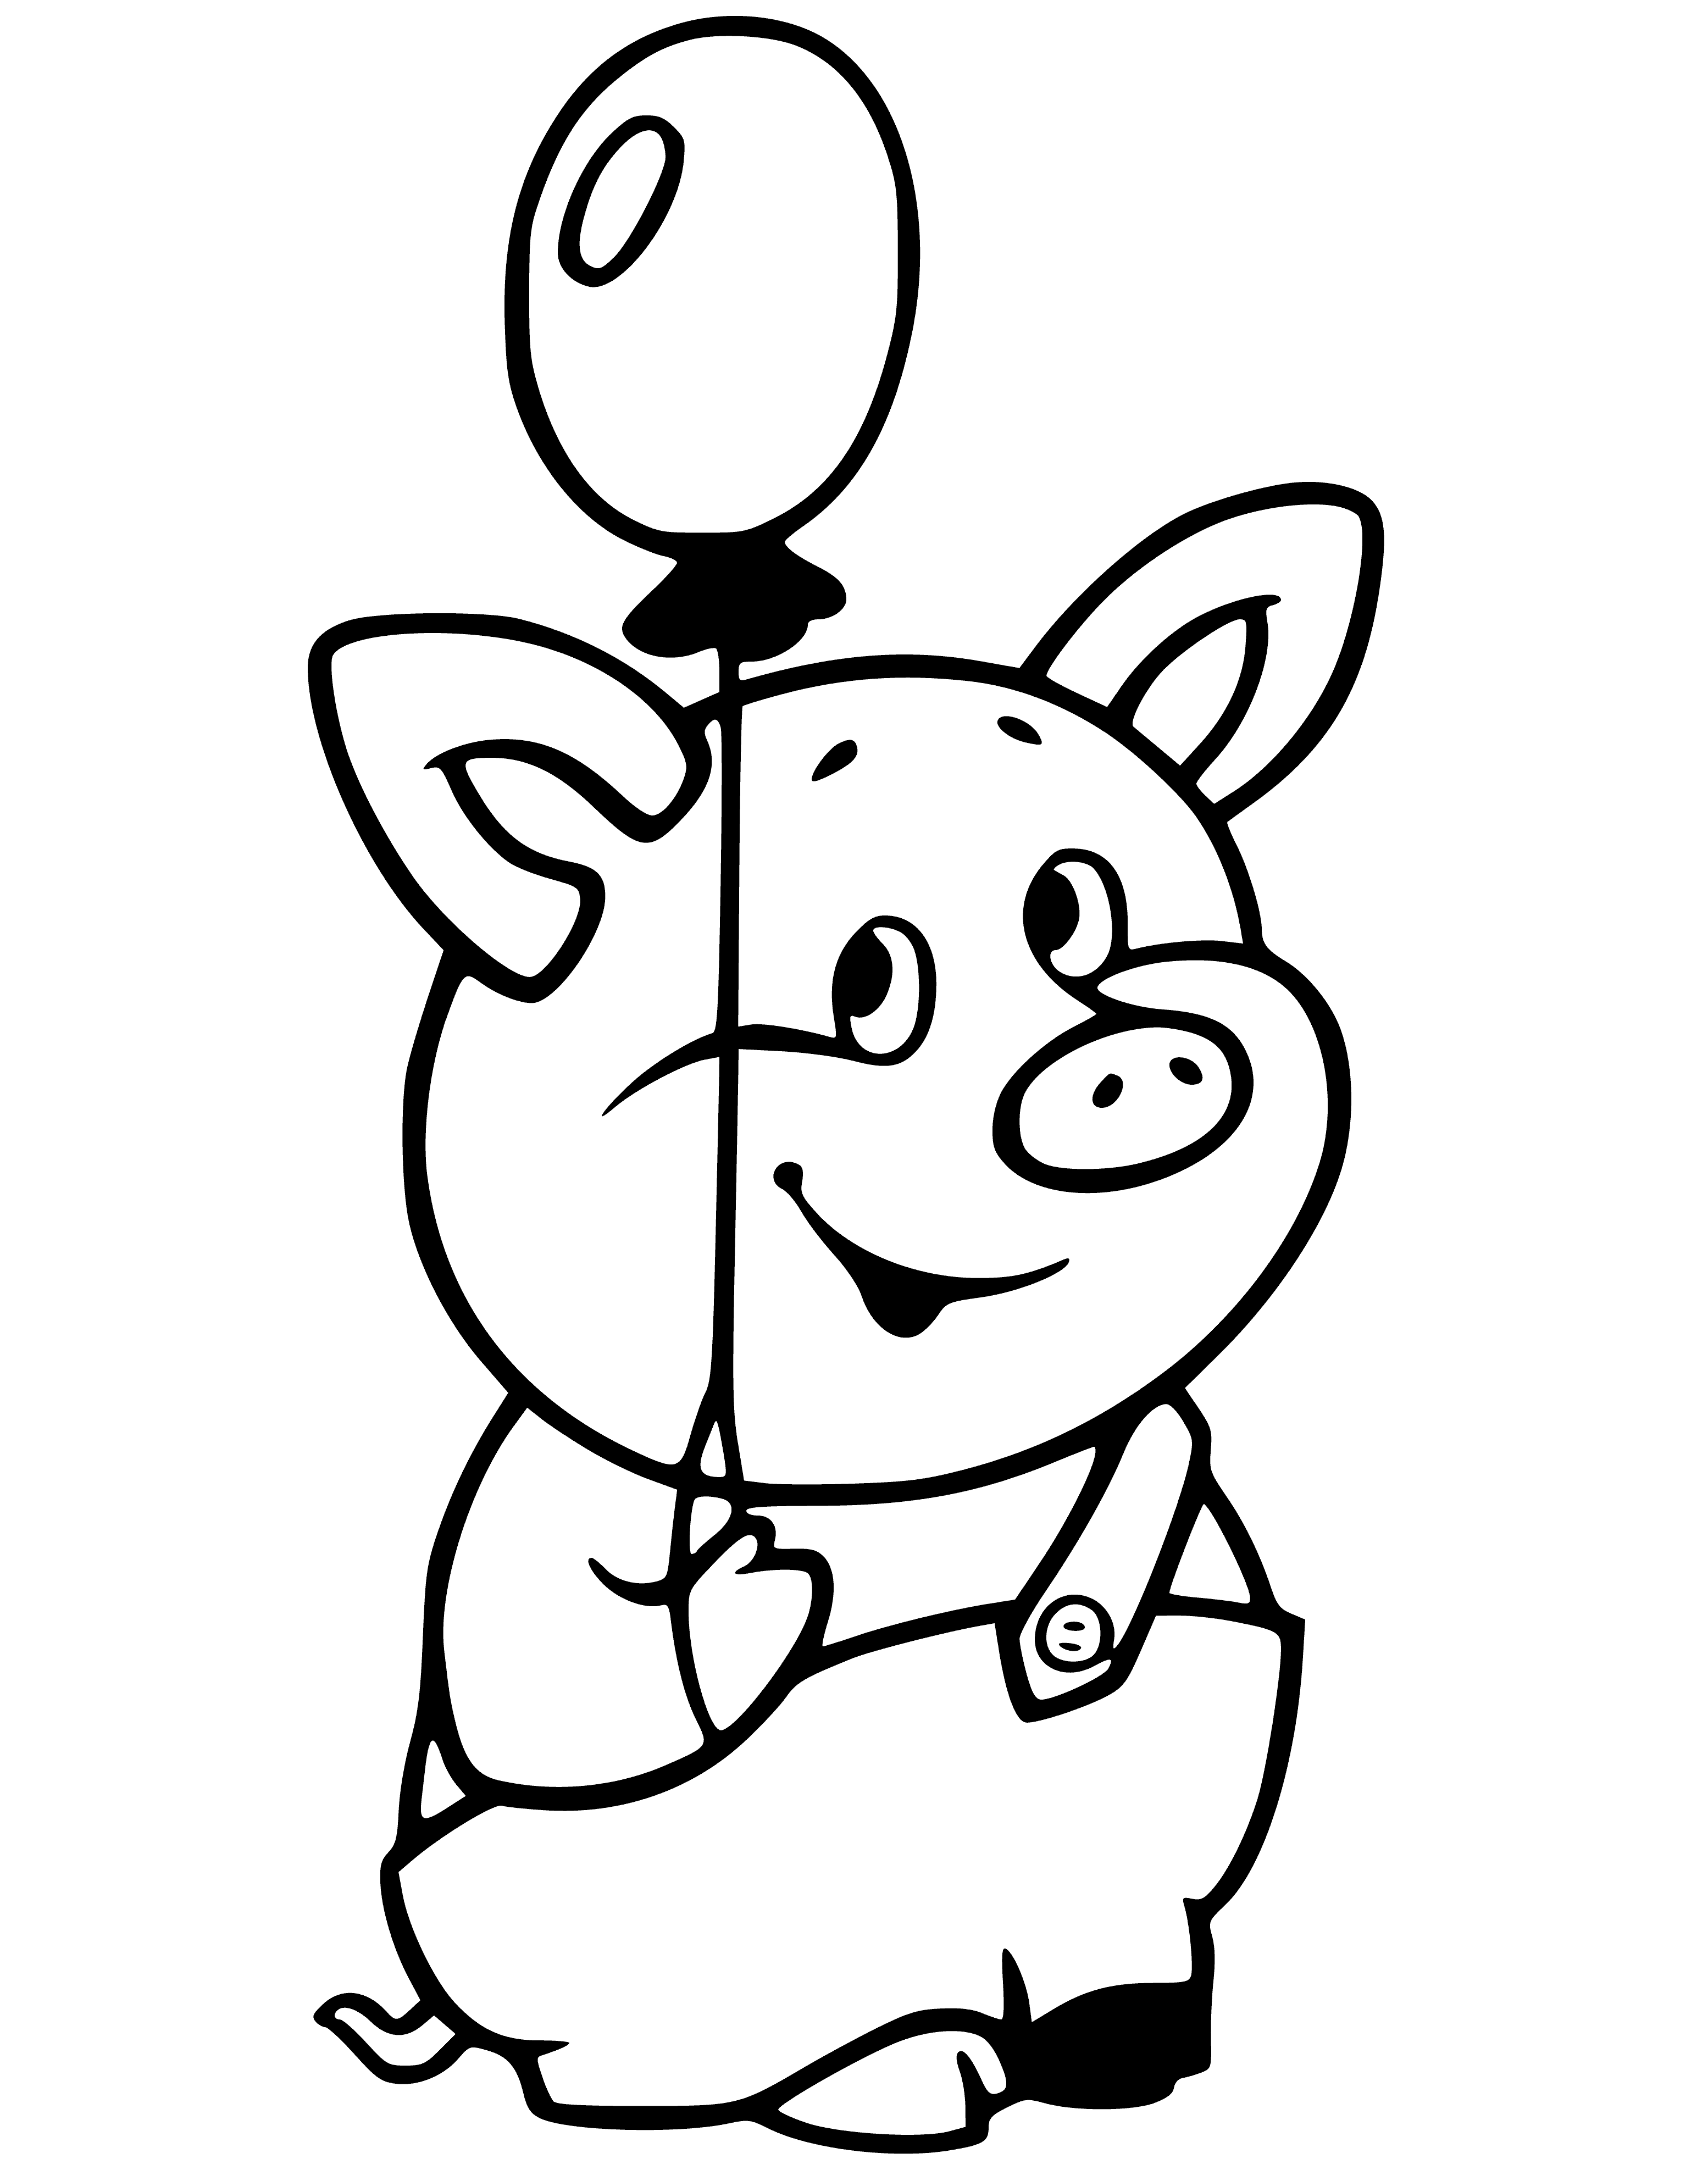 coloring page: Small pink piglet stands on hind legs, paws in air. Curly tail, long snout nose, floppy ears and black eyes.